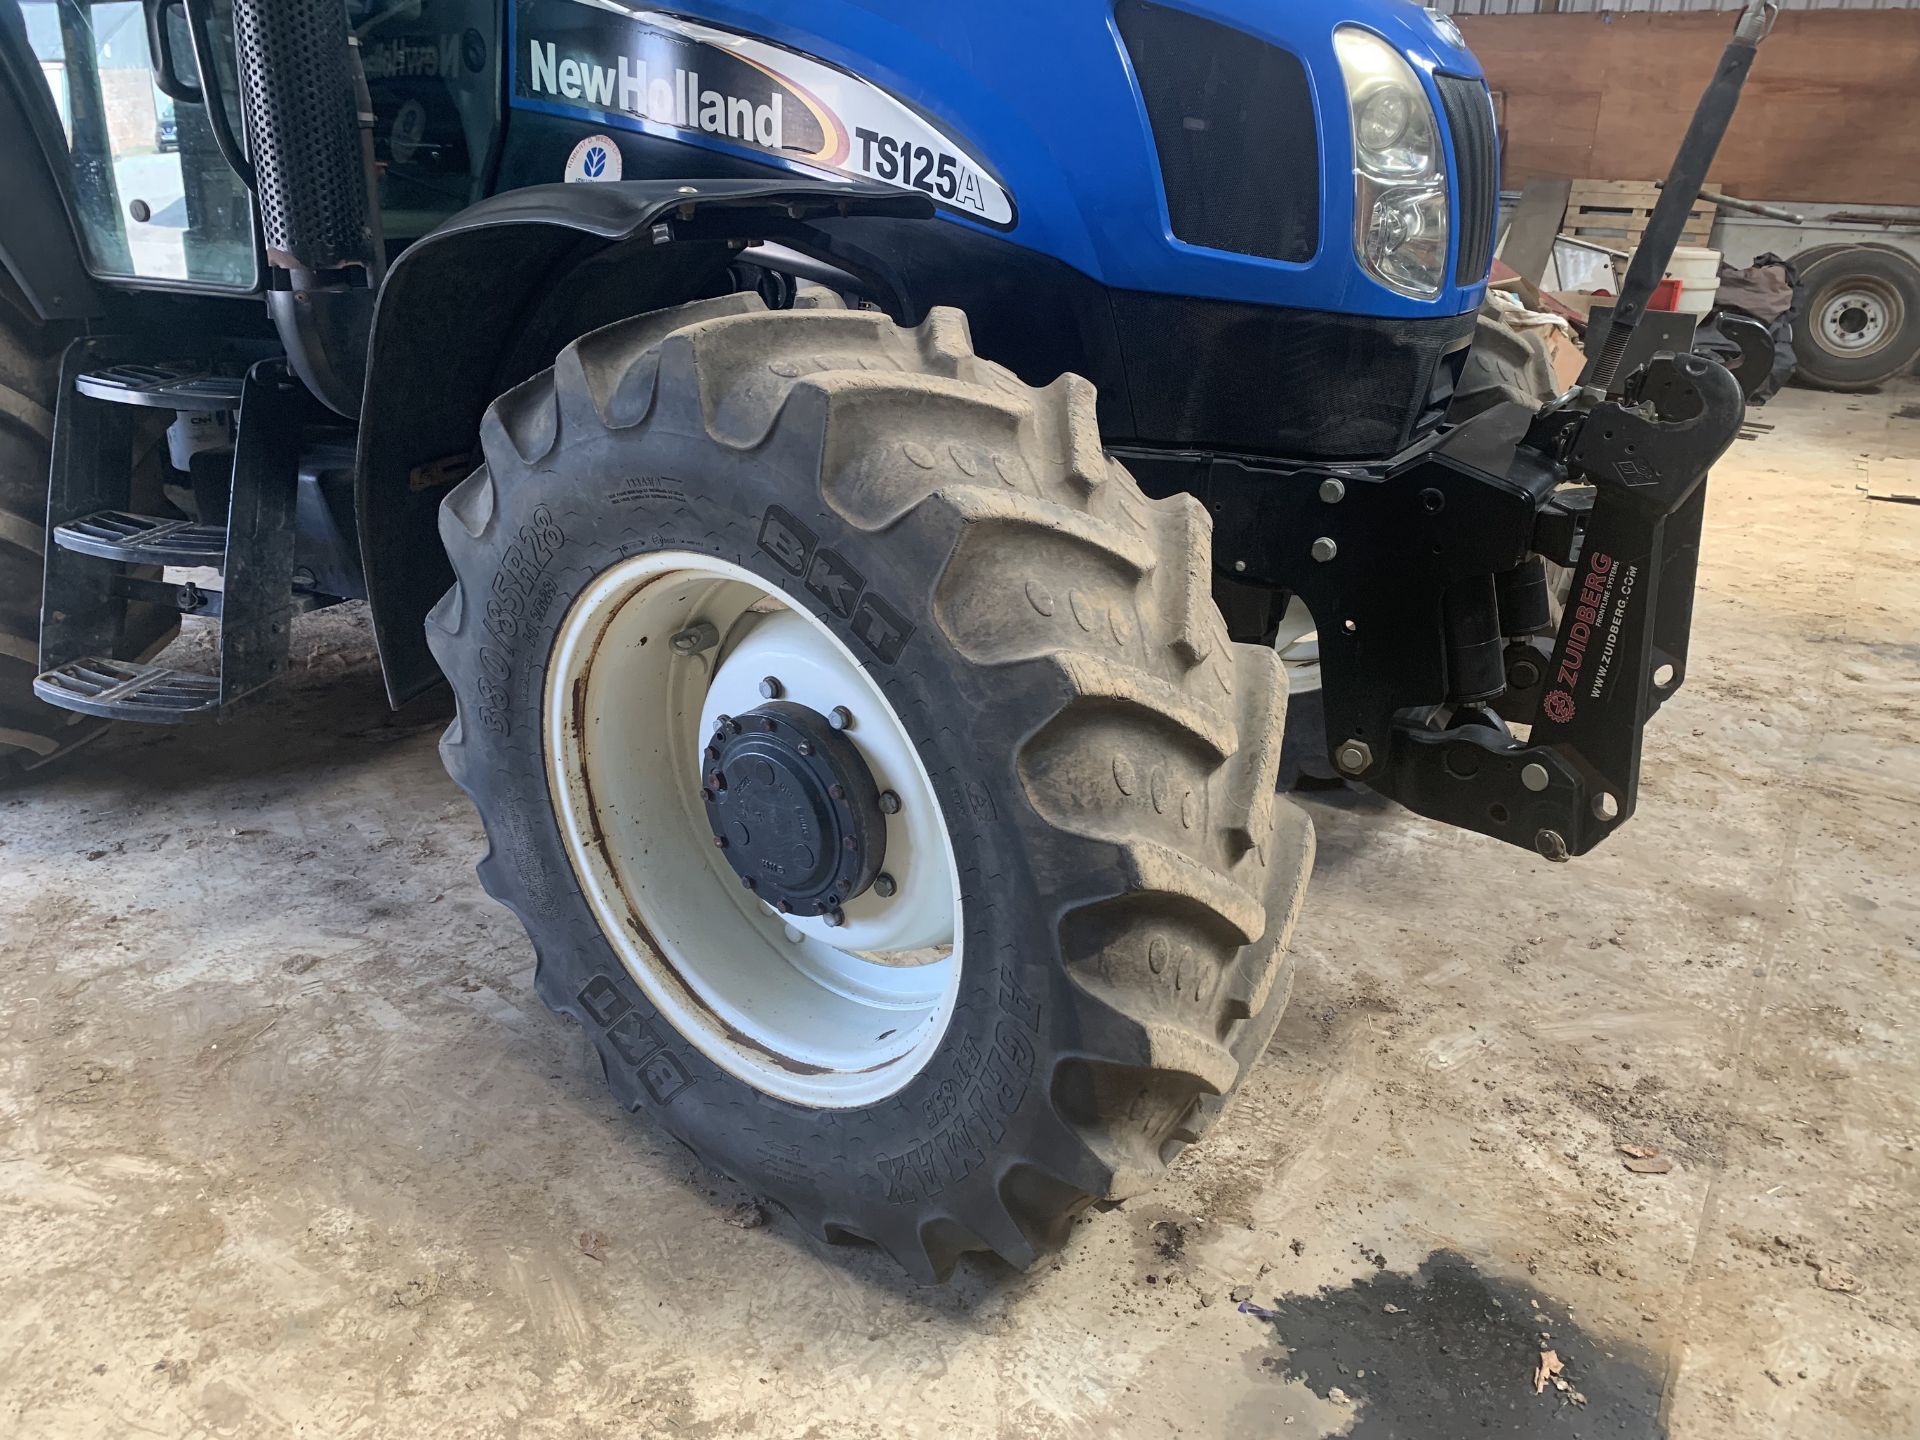 New Holland TS125A tractor, YX04 EKY, 4000 hours, with front linkage, with V5 - Image 5 of 10